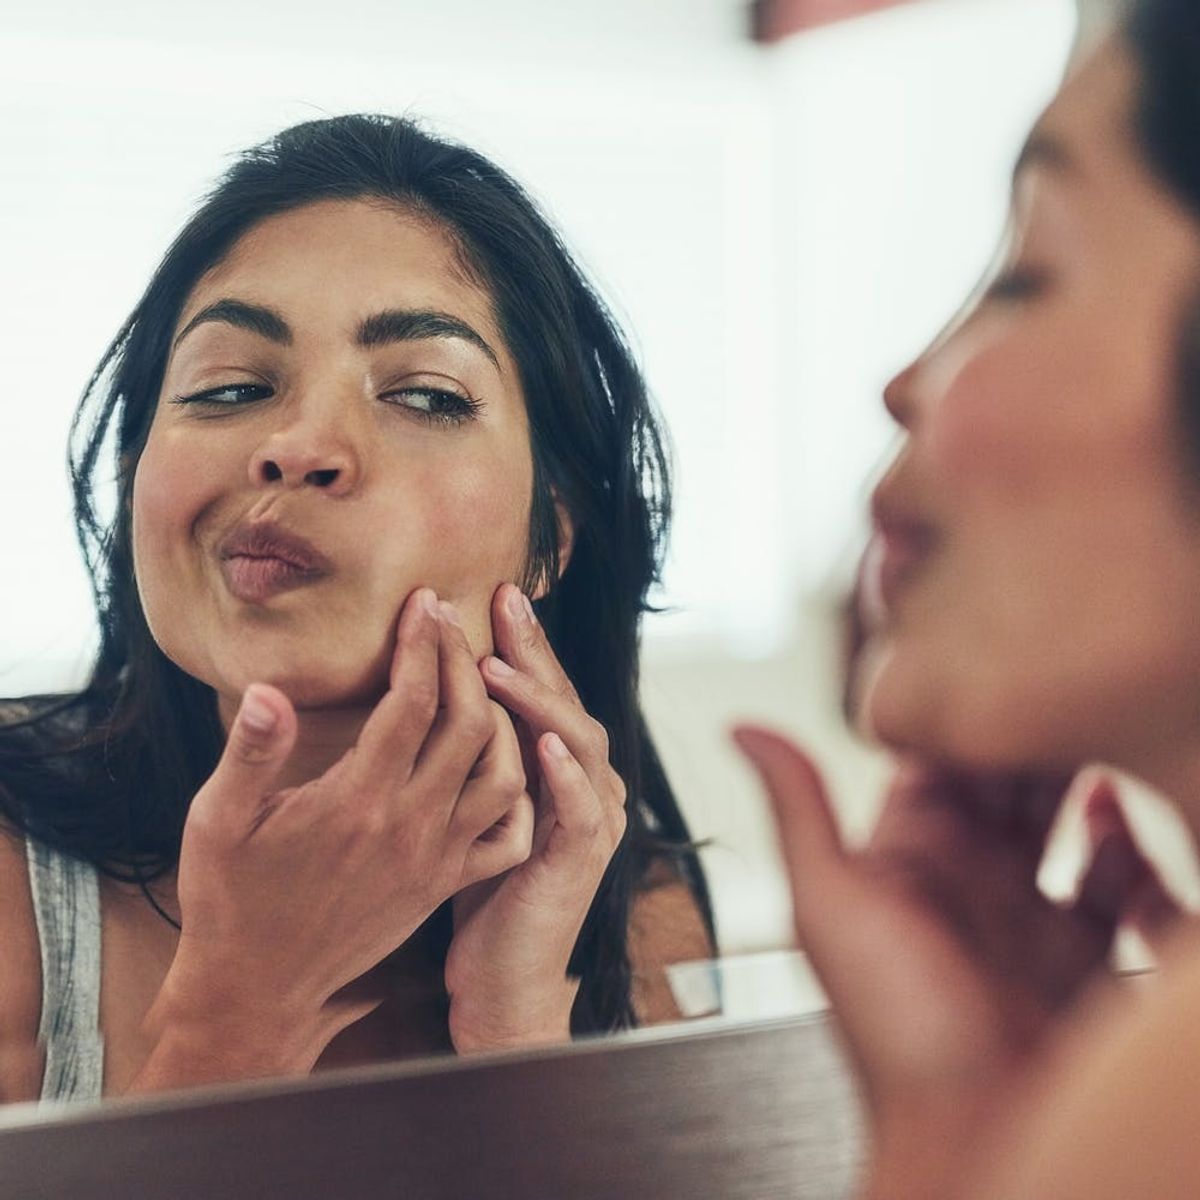 This Cystic Acne Skin Care Routine Beats Painful Pimples Every Time